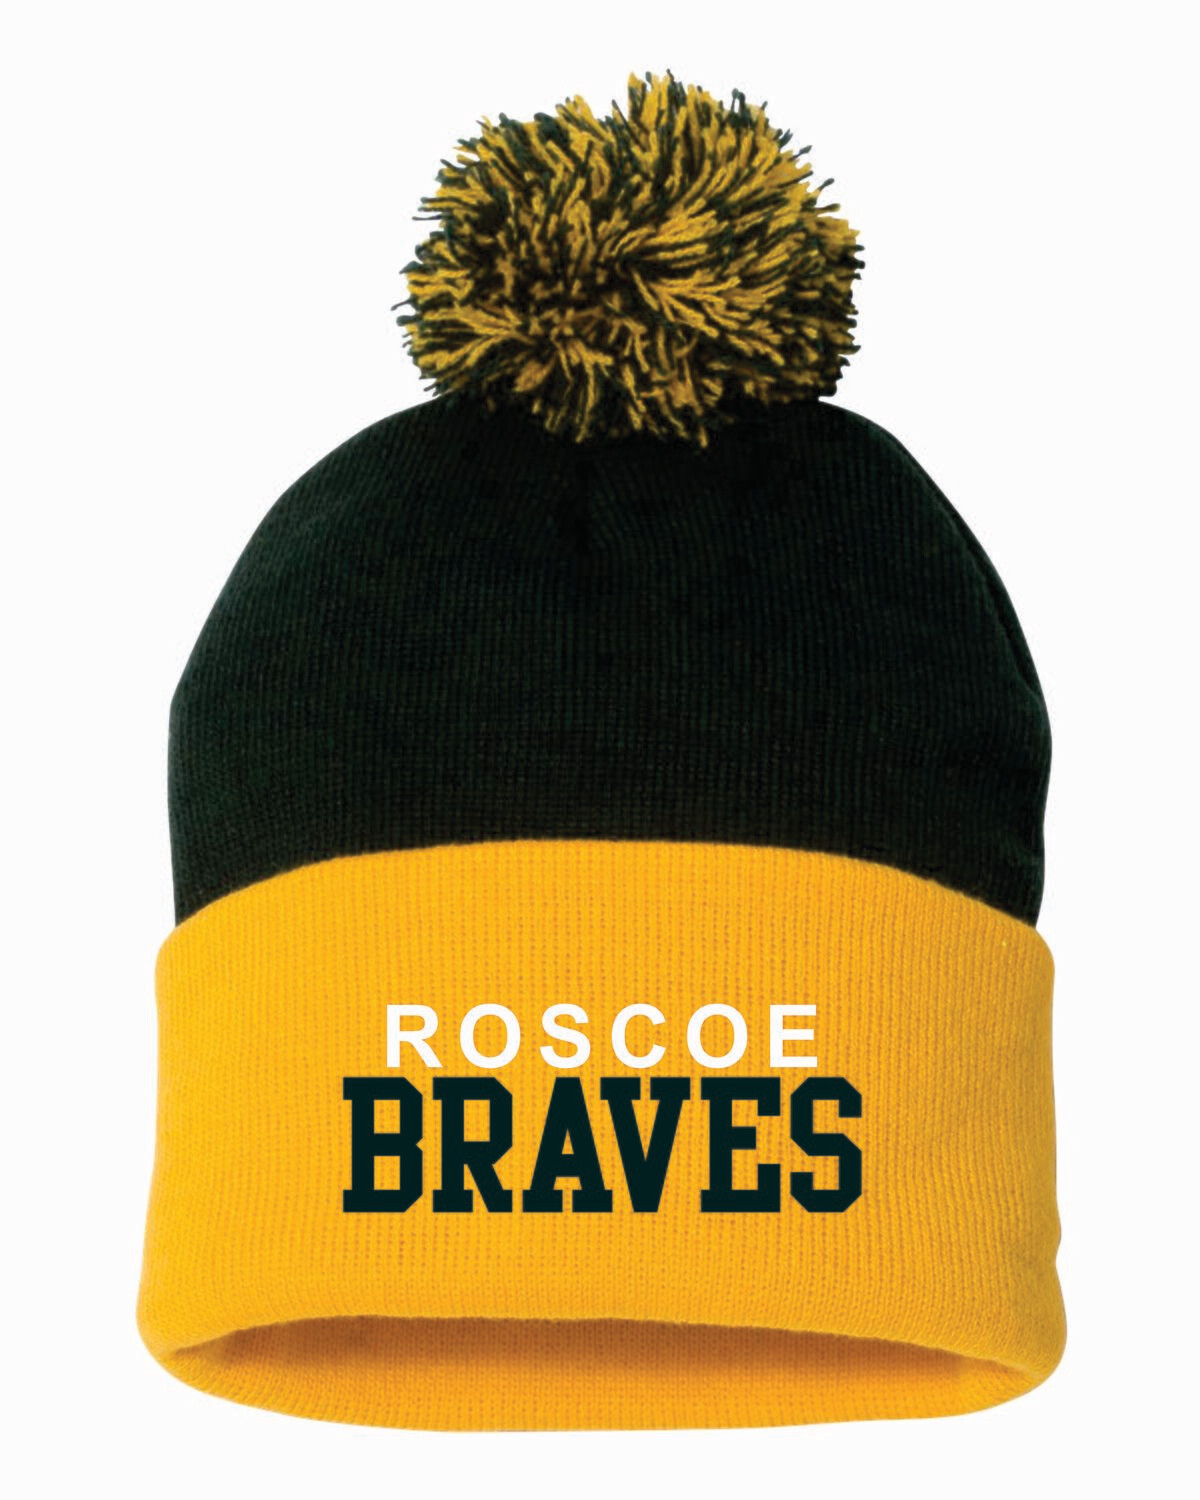 ROSCOE BRAVES 12" Pom-Pom Knit Beanie, Embroidered, 4 Colors Available